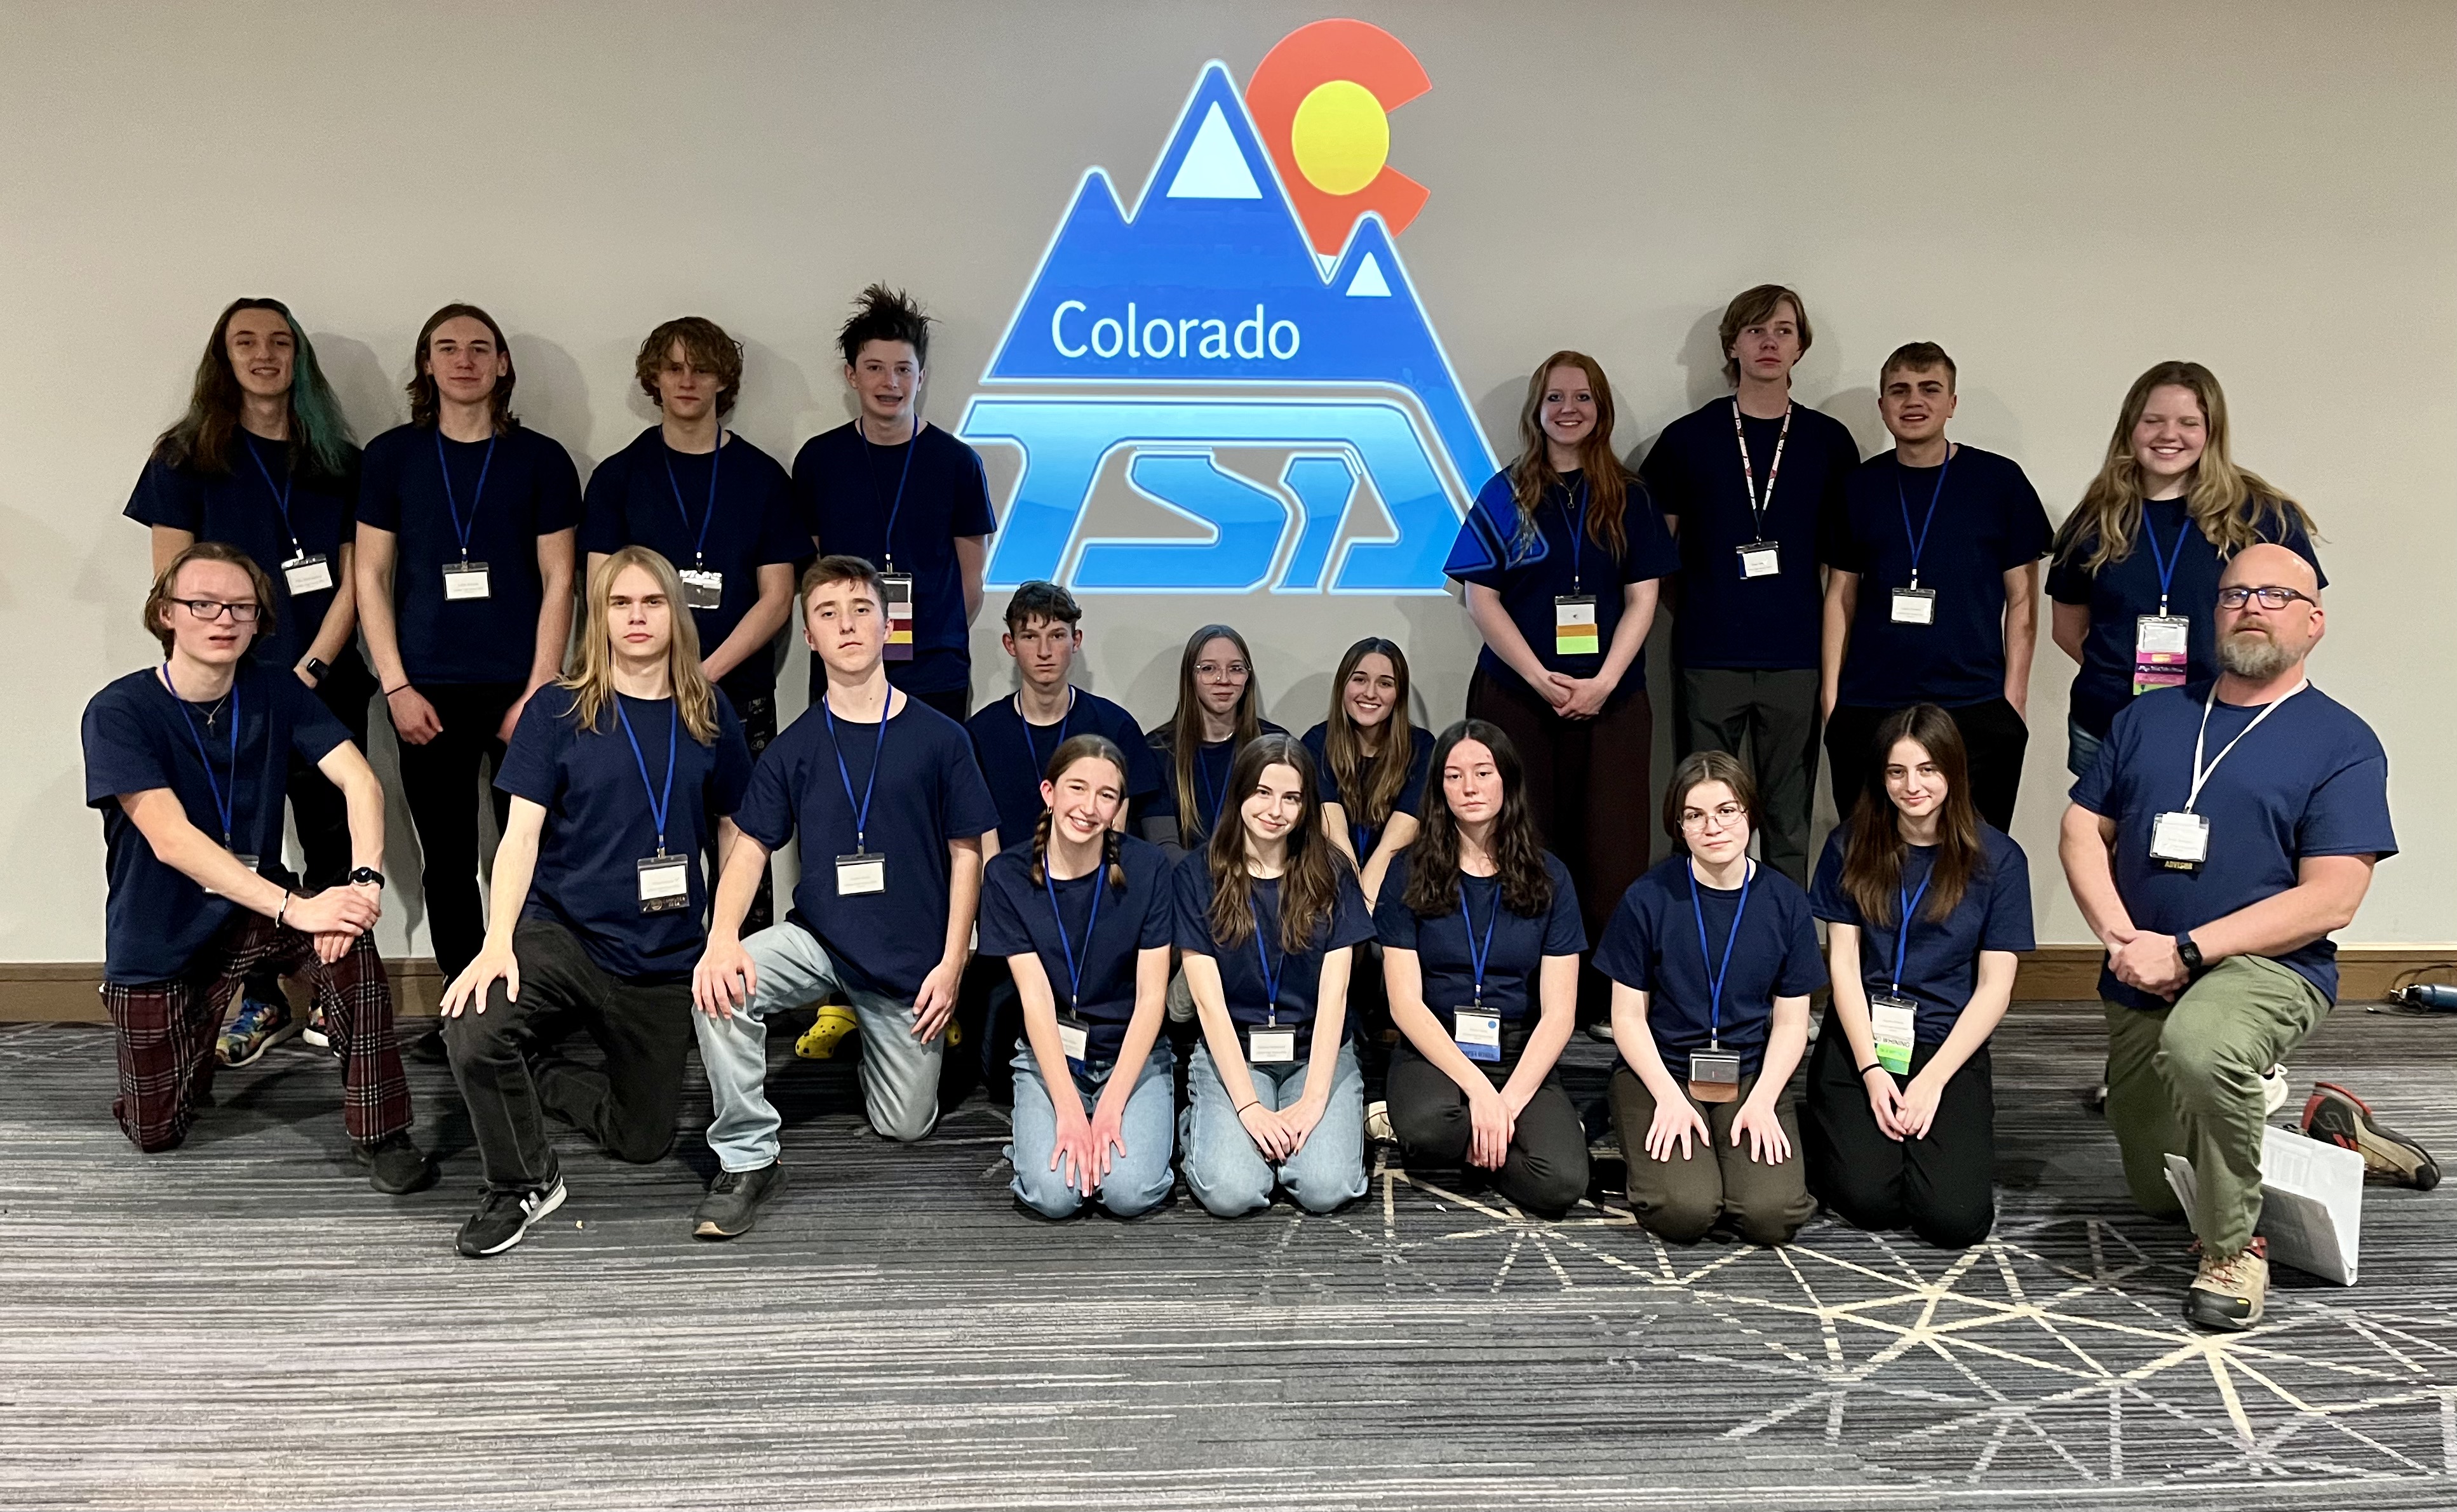 Participants from LHS pose with the Colorado TSA logo against a blank wall.